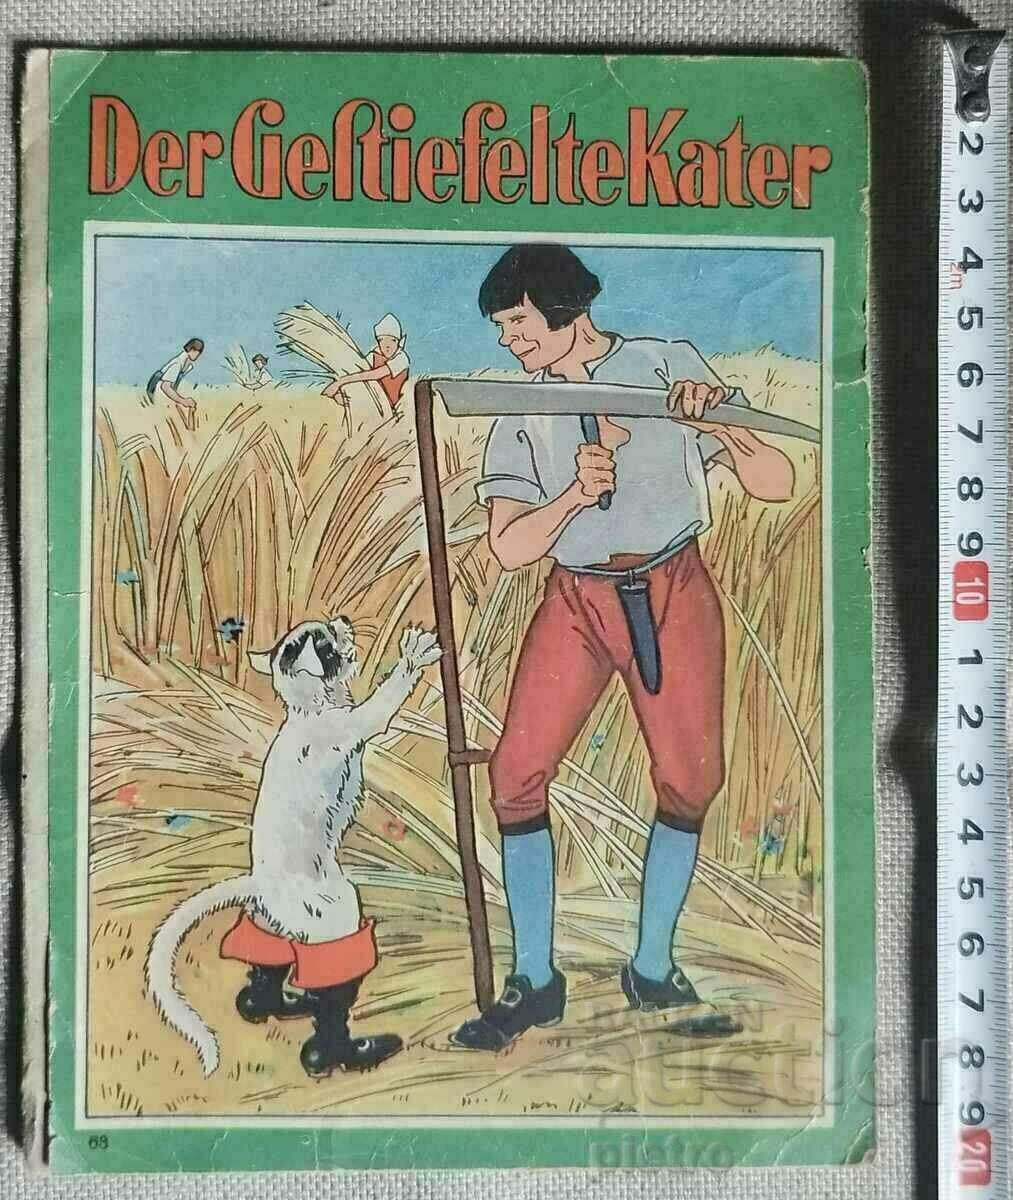 Old German children's book Puss in Boots